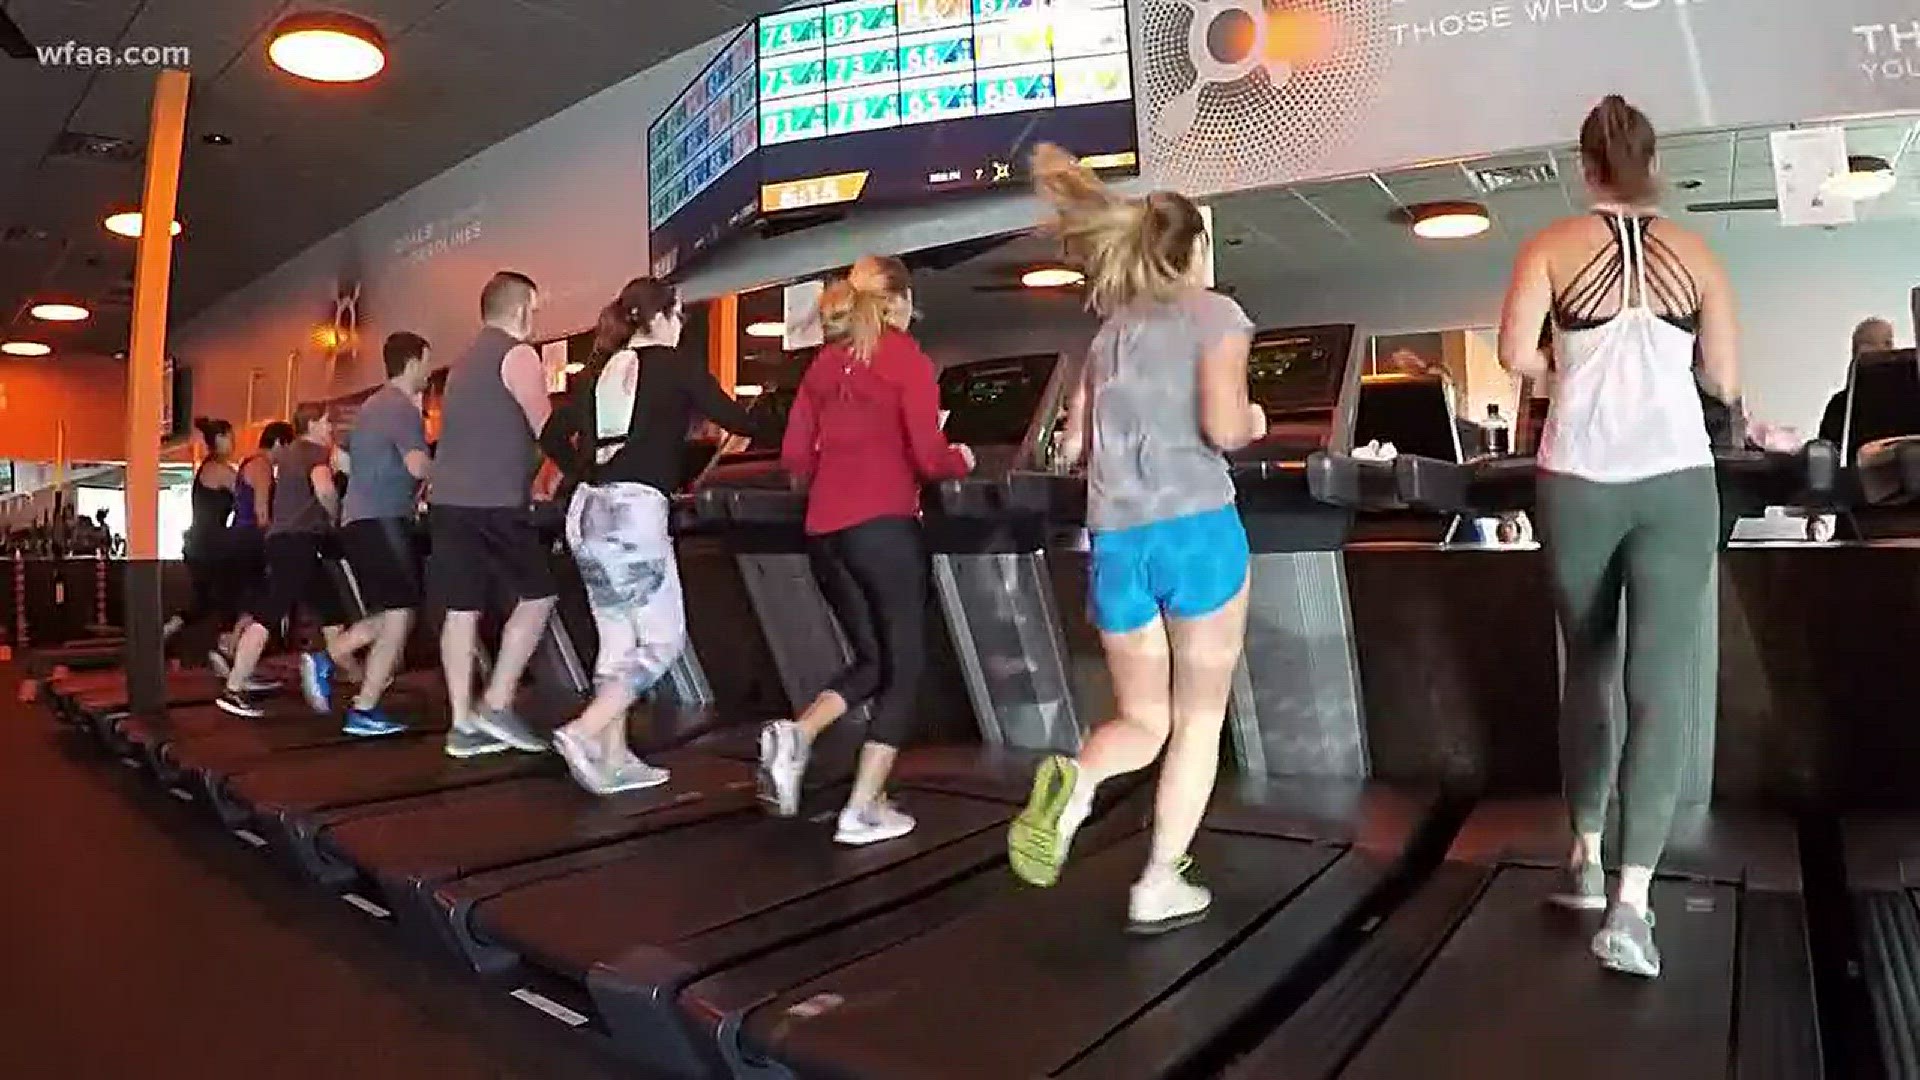 A look at the hot fitness trend, Orange Theory